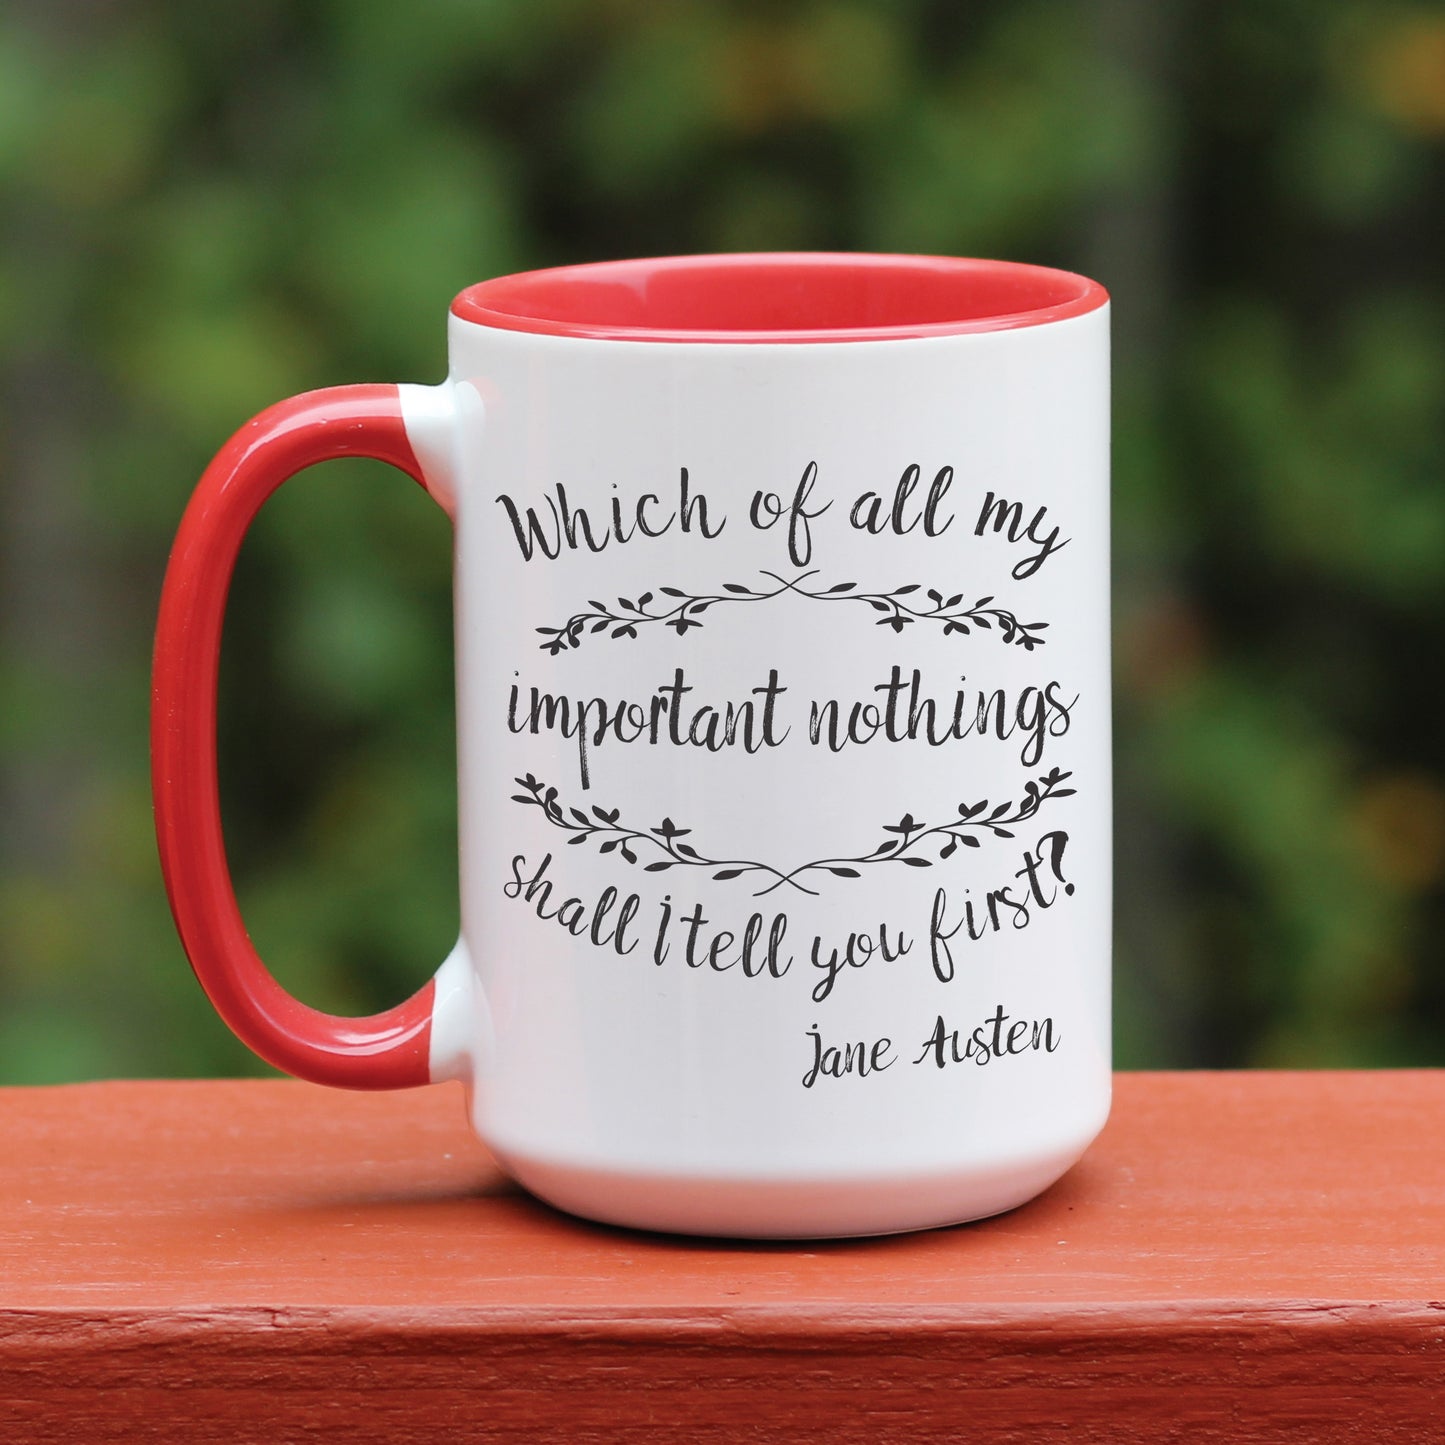 Jane Austen Pride and Prejudice quote white coffee mug with red handle.